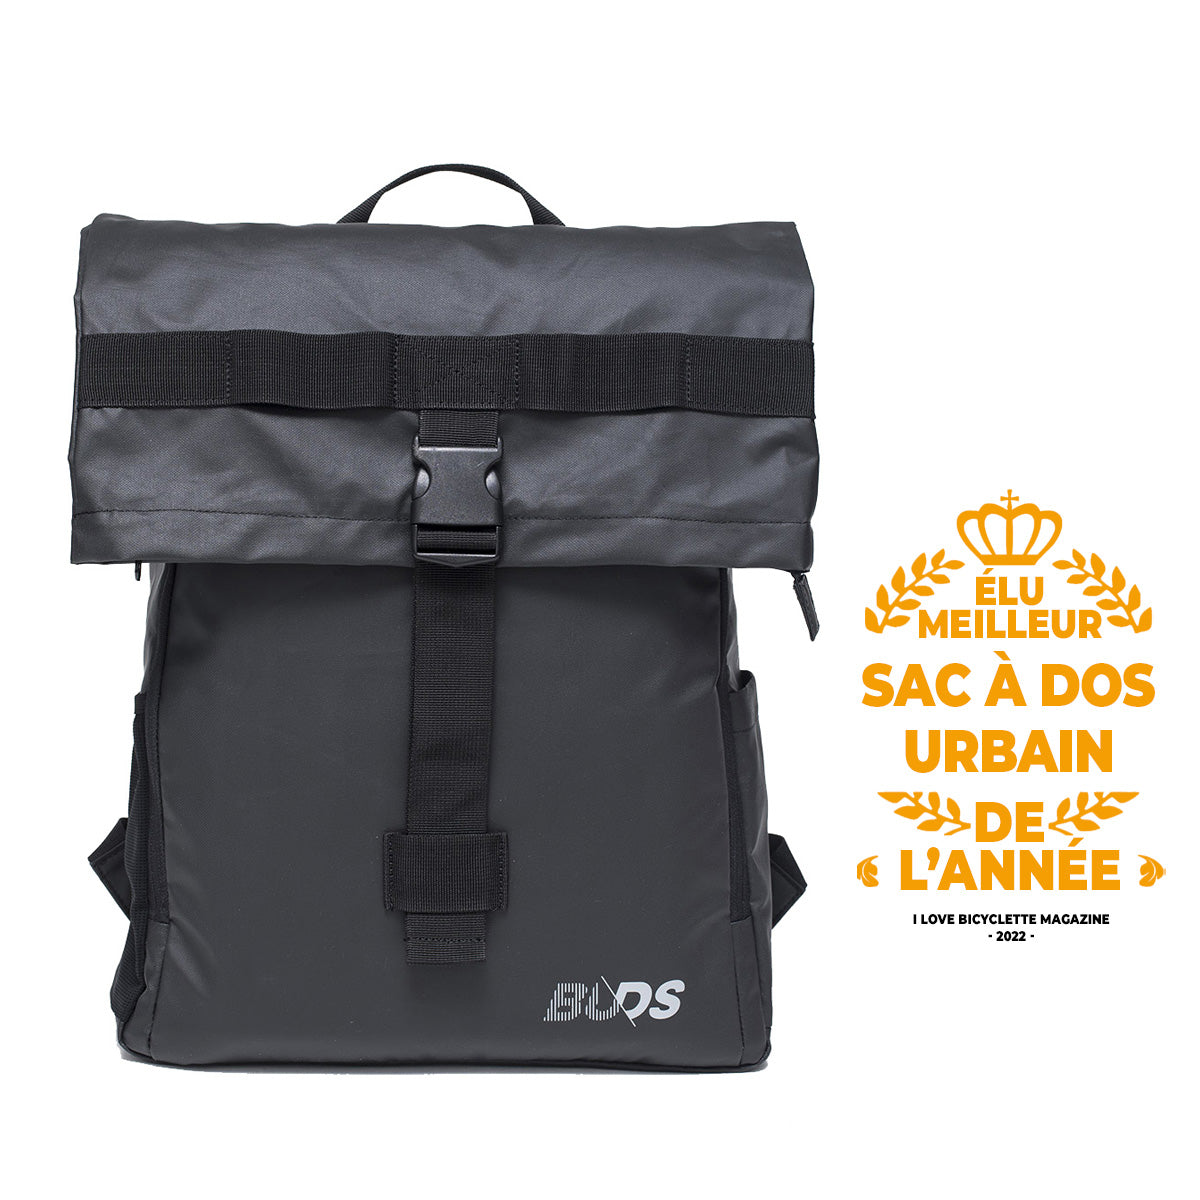 City Bag Original | Rucksack with luggage rack attachment